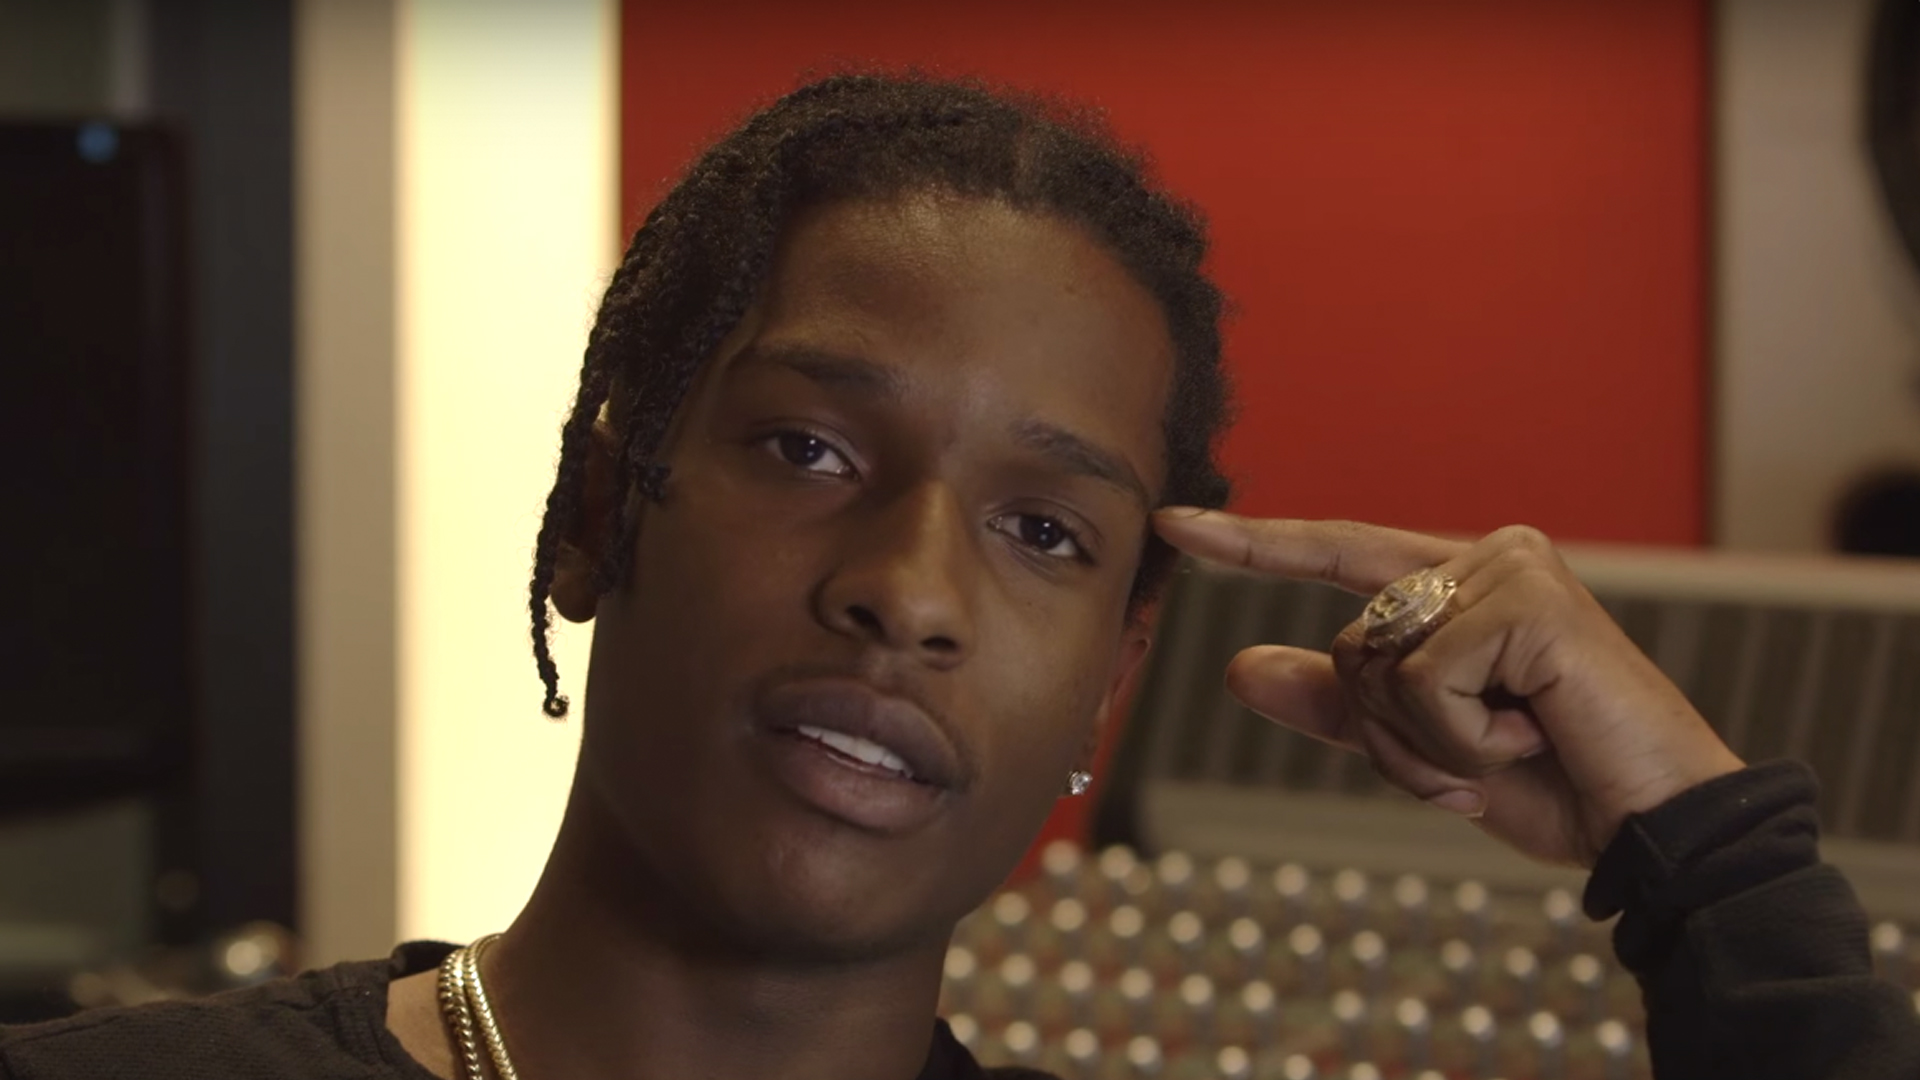 The People Vs A$Ap Rocky - Vice Video: Documentaries, Films, News Videos